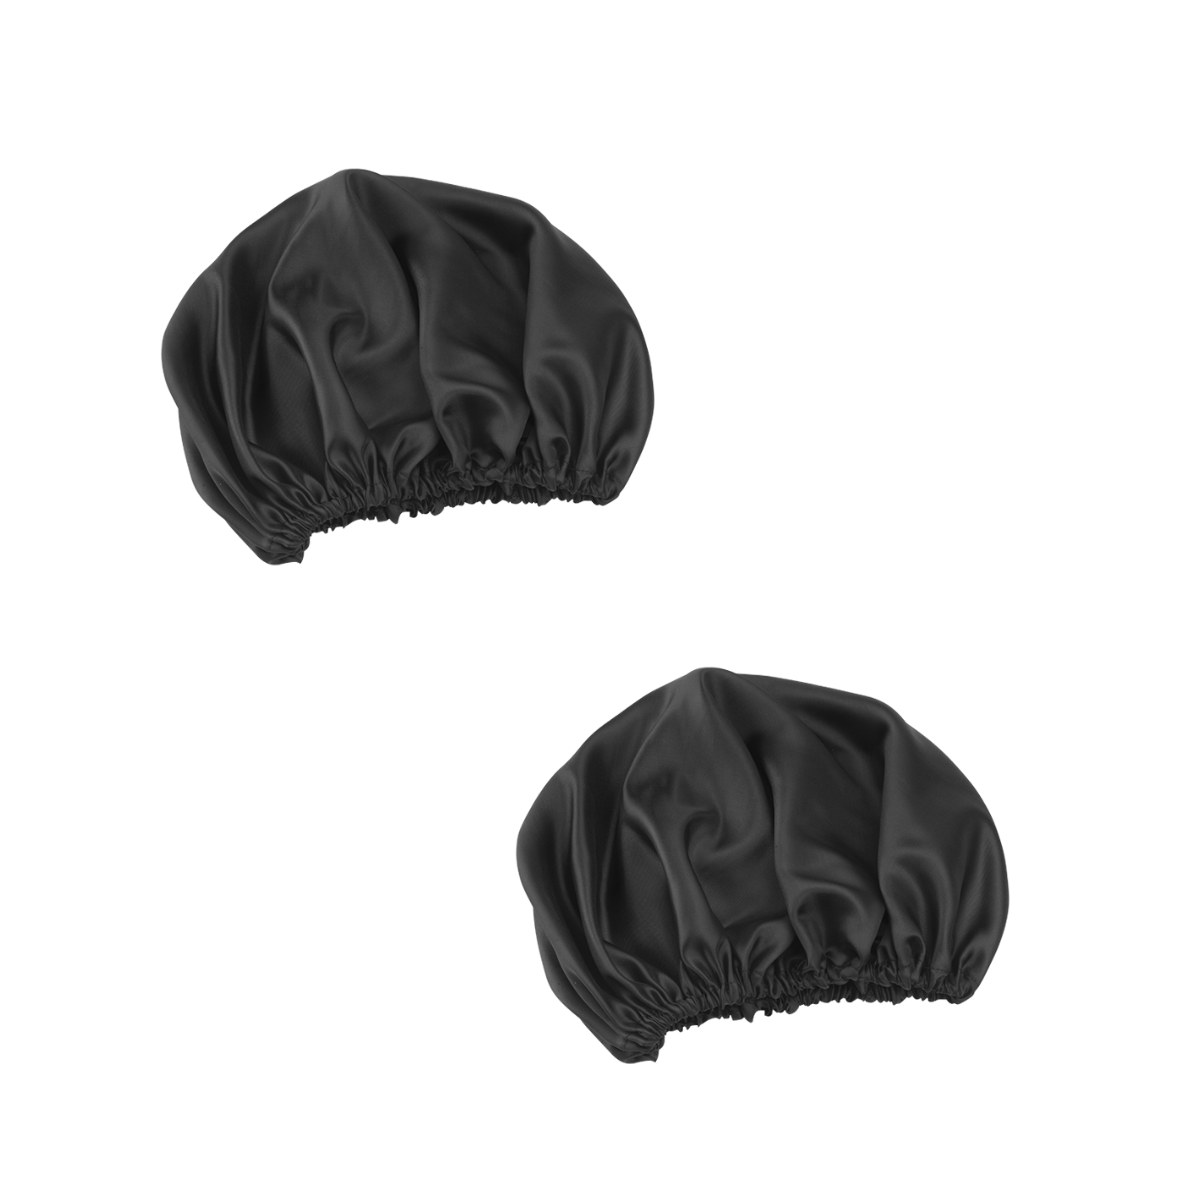 Dompel satin hair cap for curly, voluminous, or straight hair, it prevents frizz, dryness, knots and hair breakage when sleep. Model 392 (2 PCS) - depilcompany